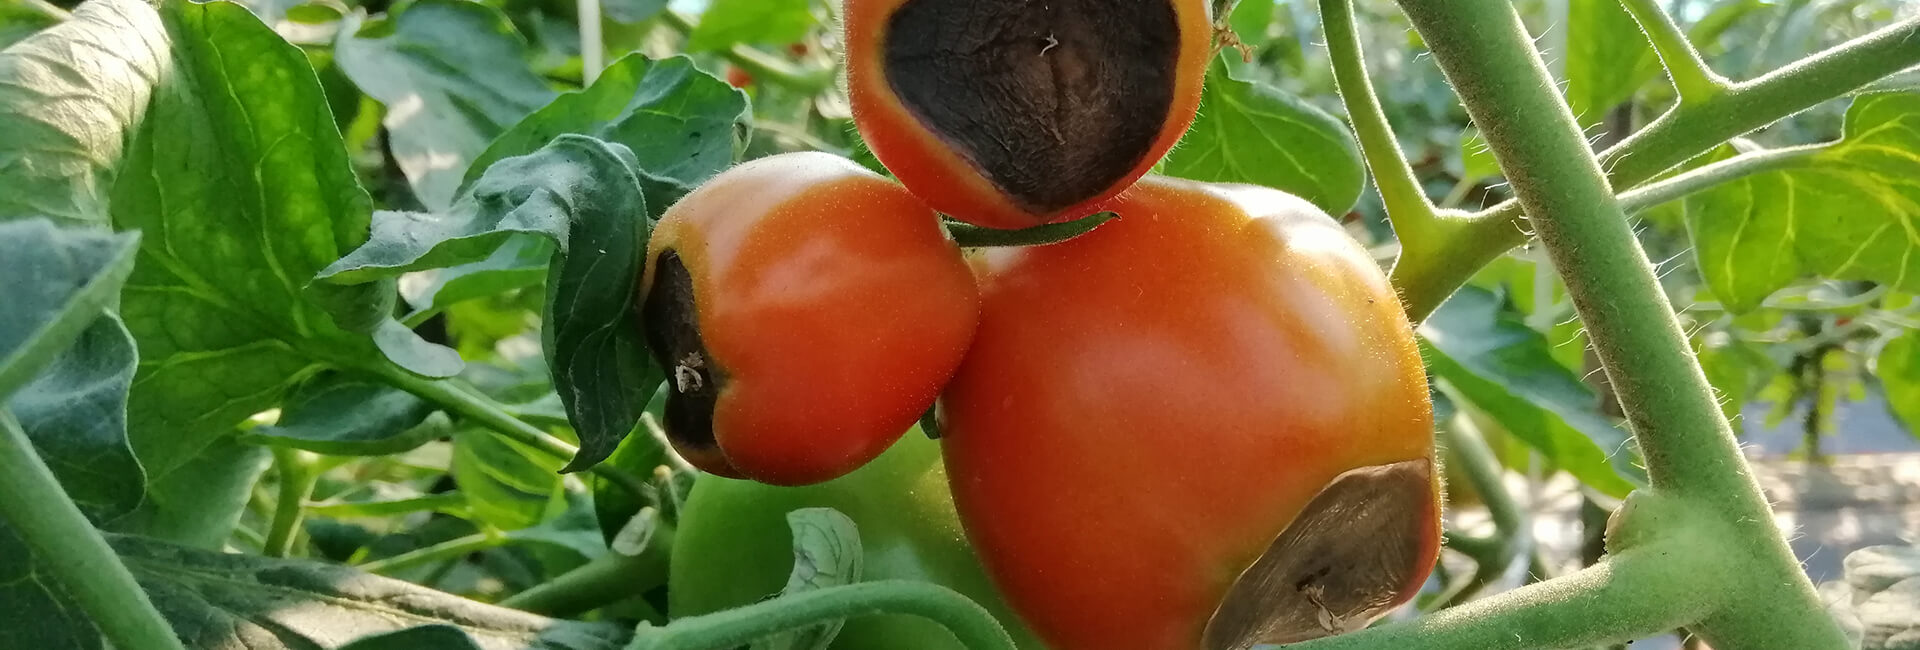 Tomato with blossom end rot - what to do